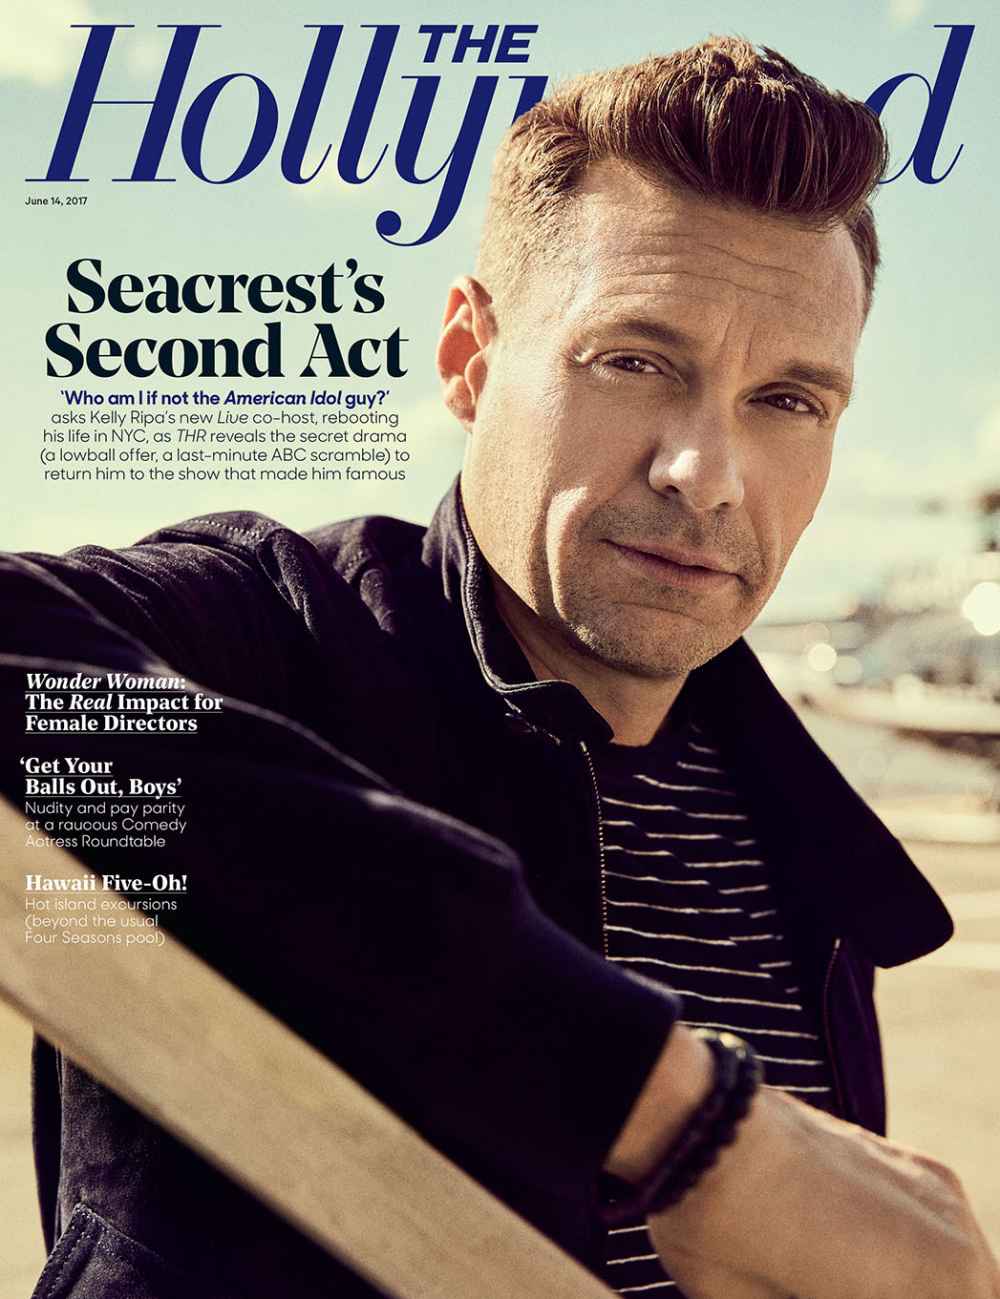 Ryan Seacrest on the cover of The Hollywood